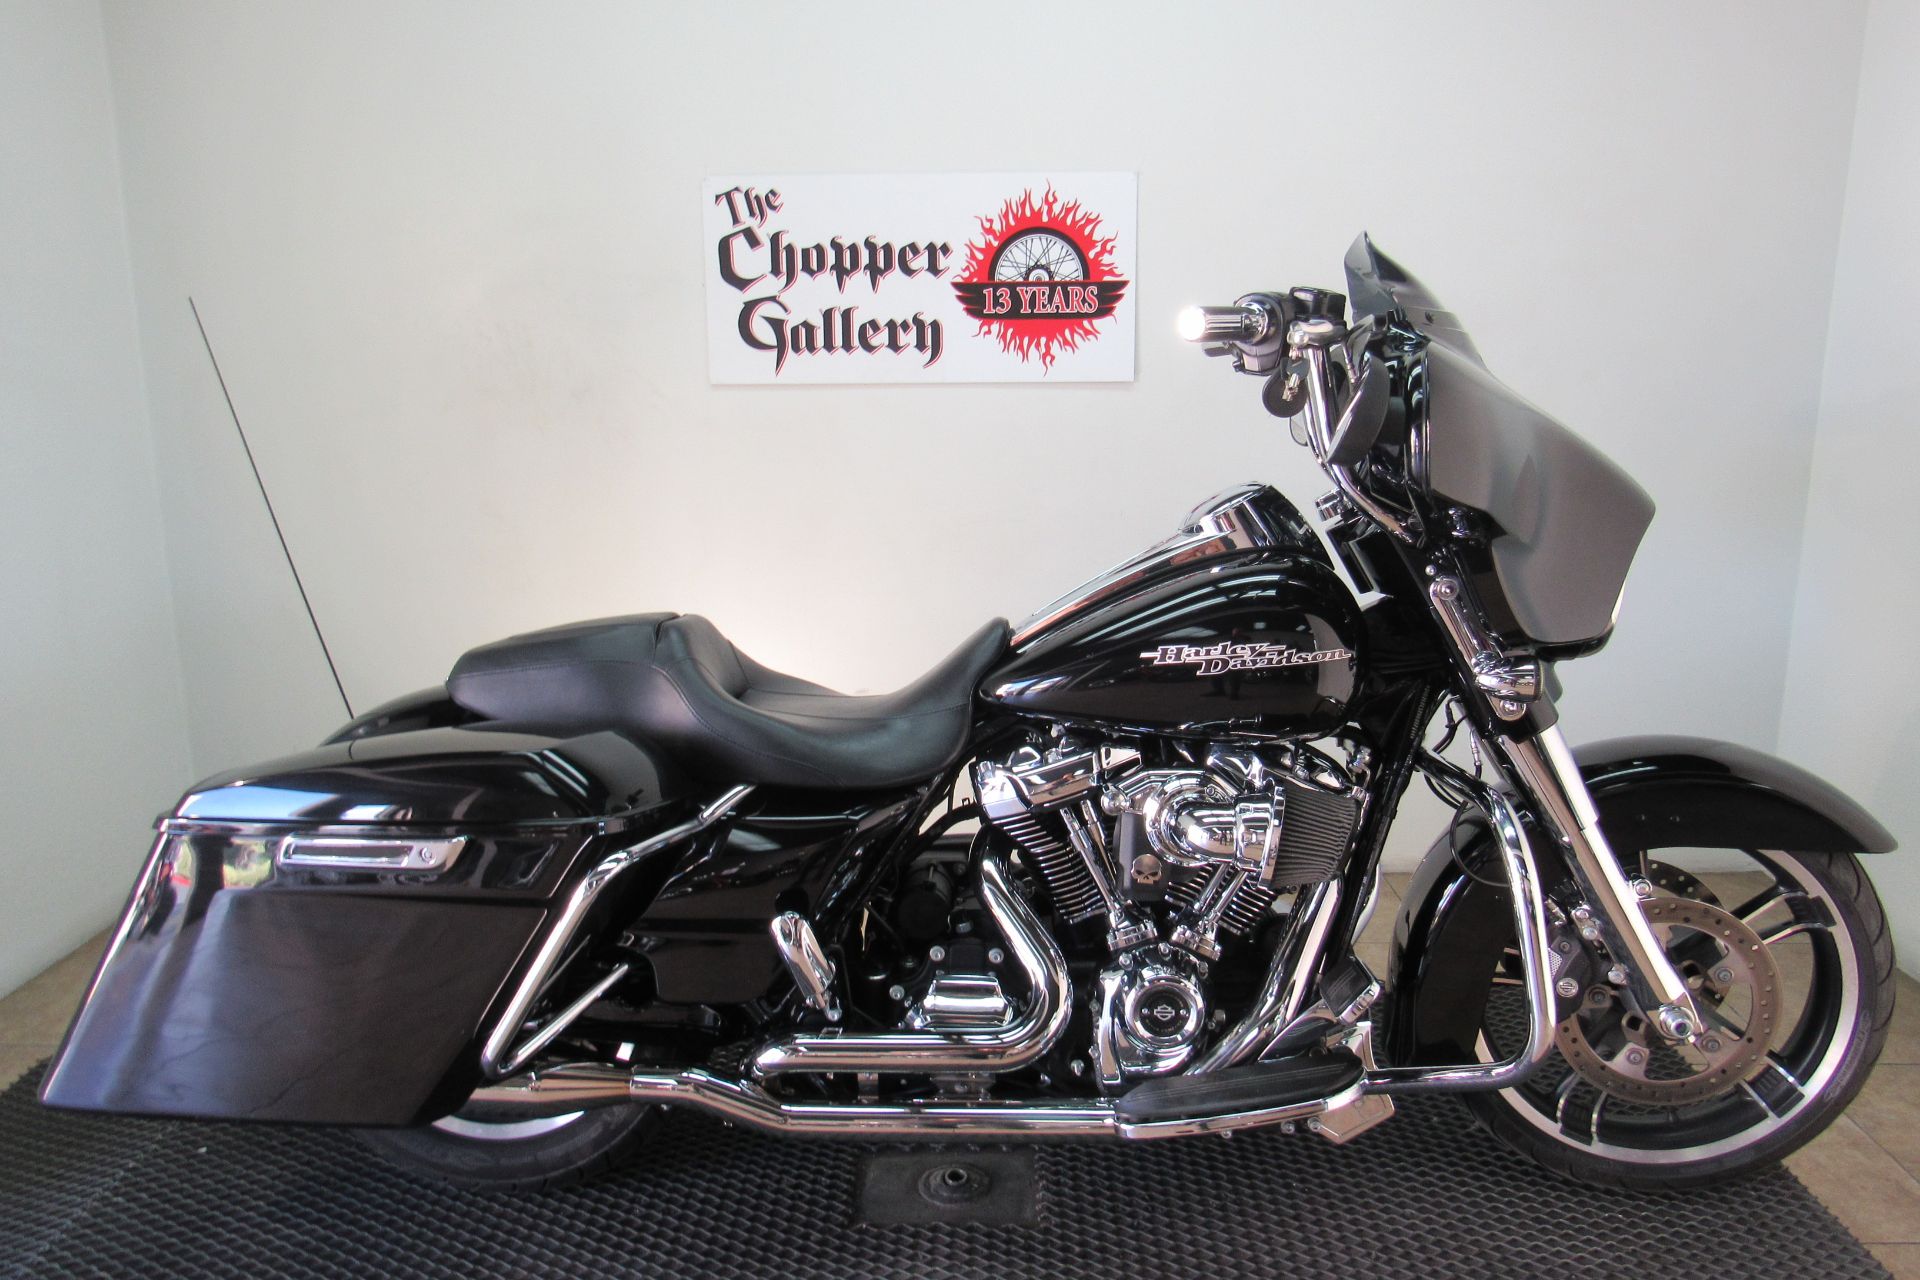 Used 2017 Harley Davidson Street Glide Special Motorcycles In Temecula Ca Stock Number V1627144